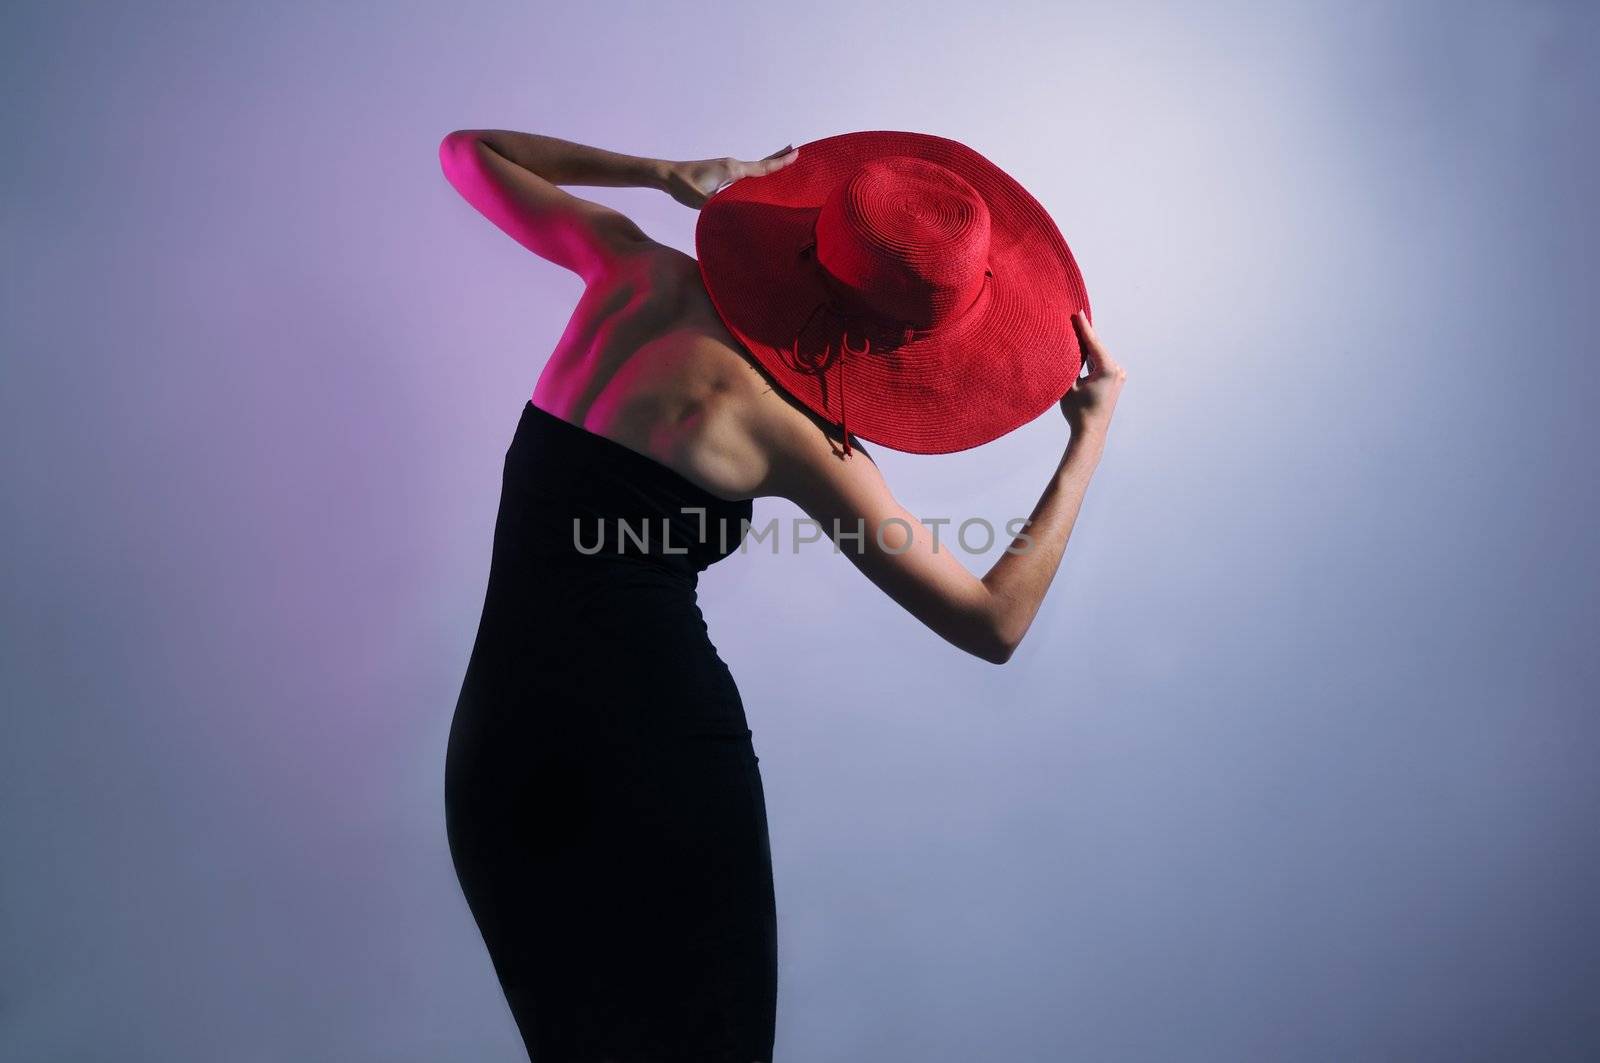 Leaning stylish lady wearing dress and hat by rgbspace